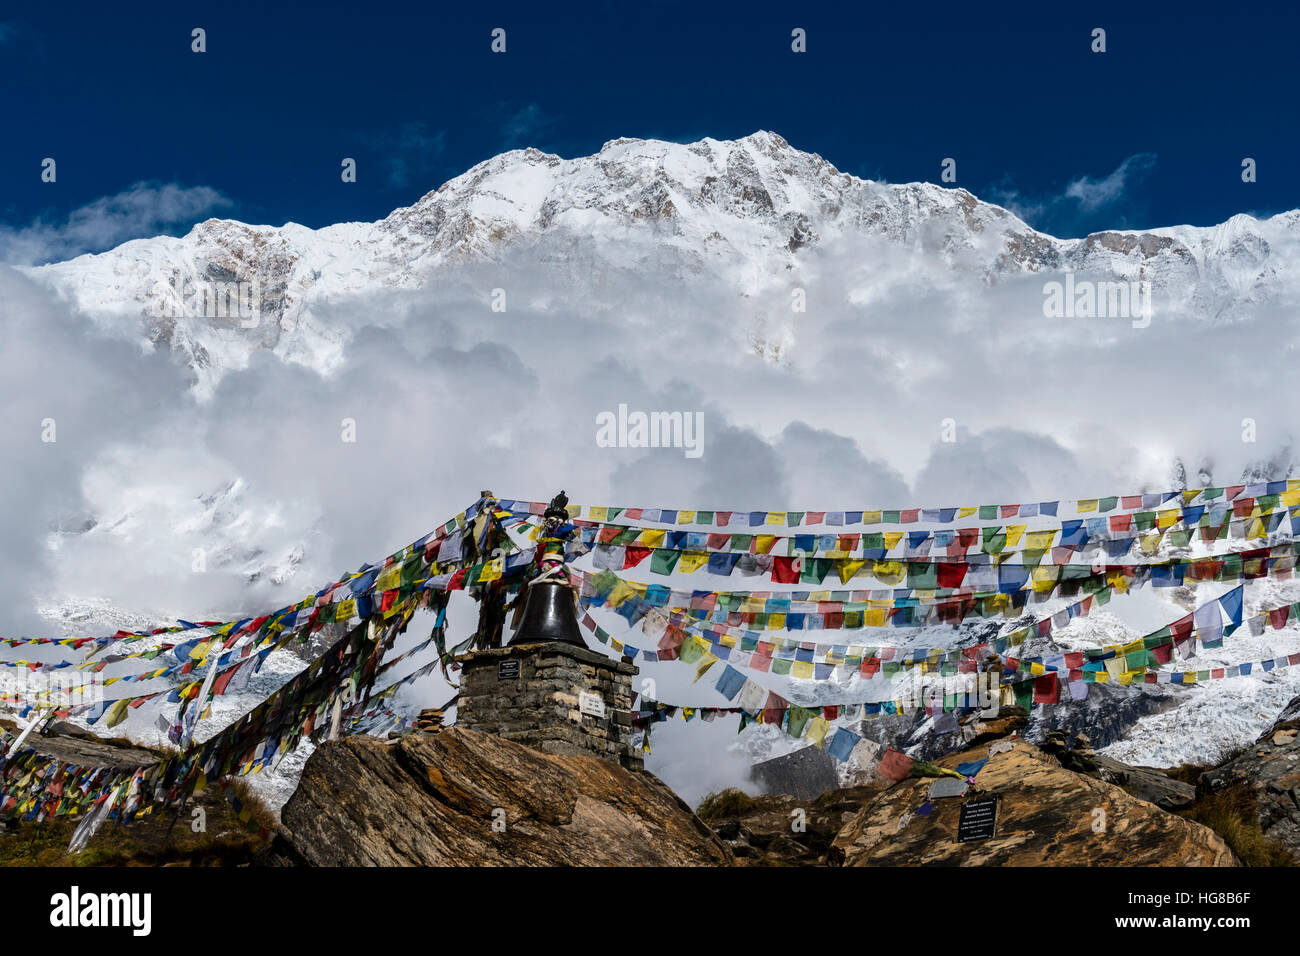 Many tibetan prayer flags are set up at a memorial for died climbers, back snow covered Annapurna 1 North Face Stock Photo